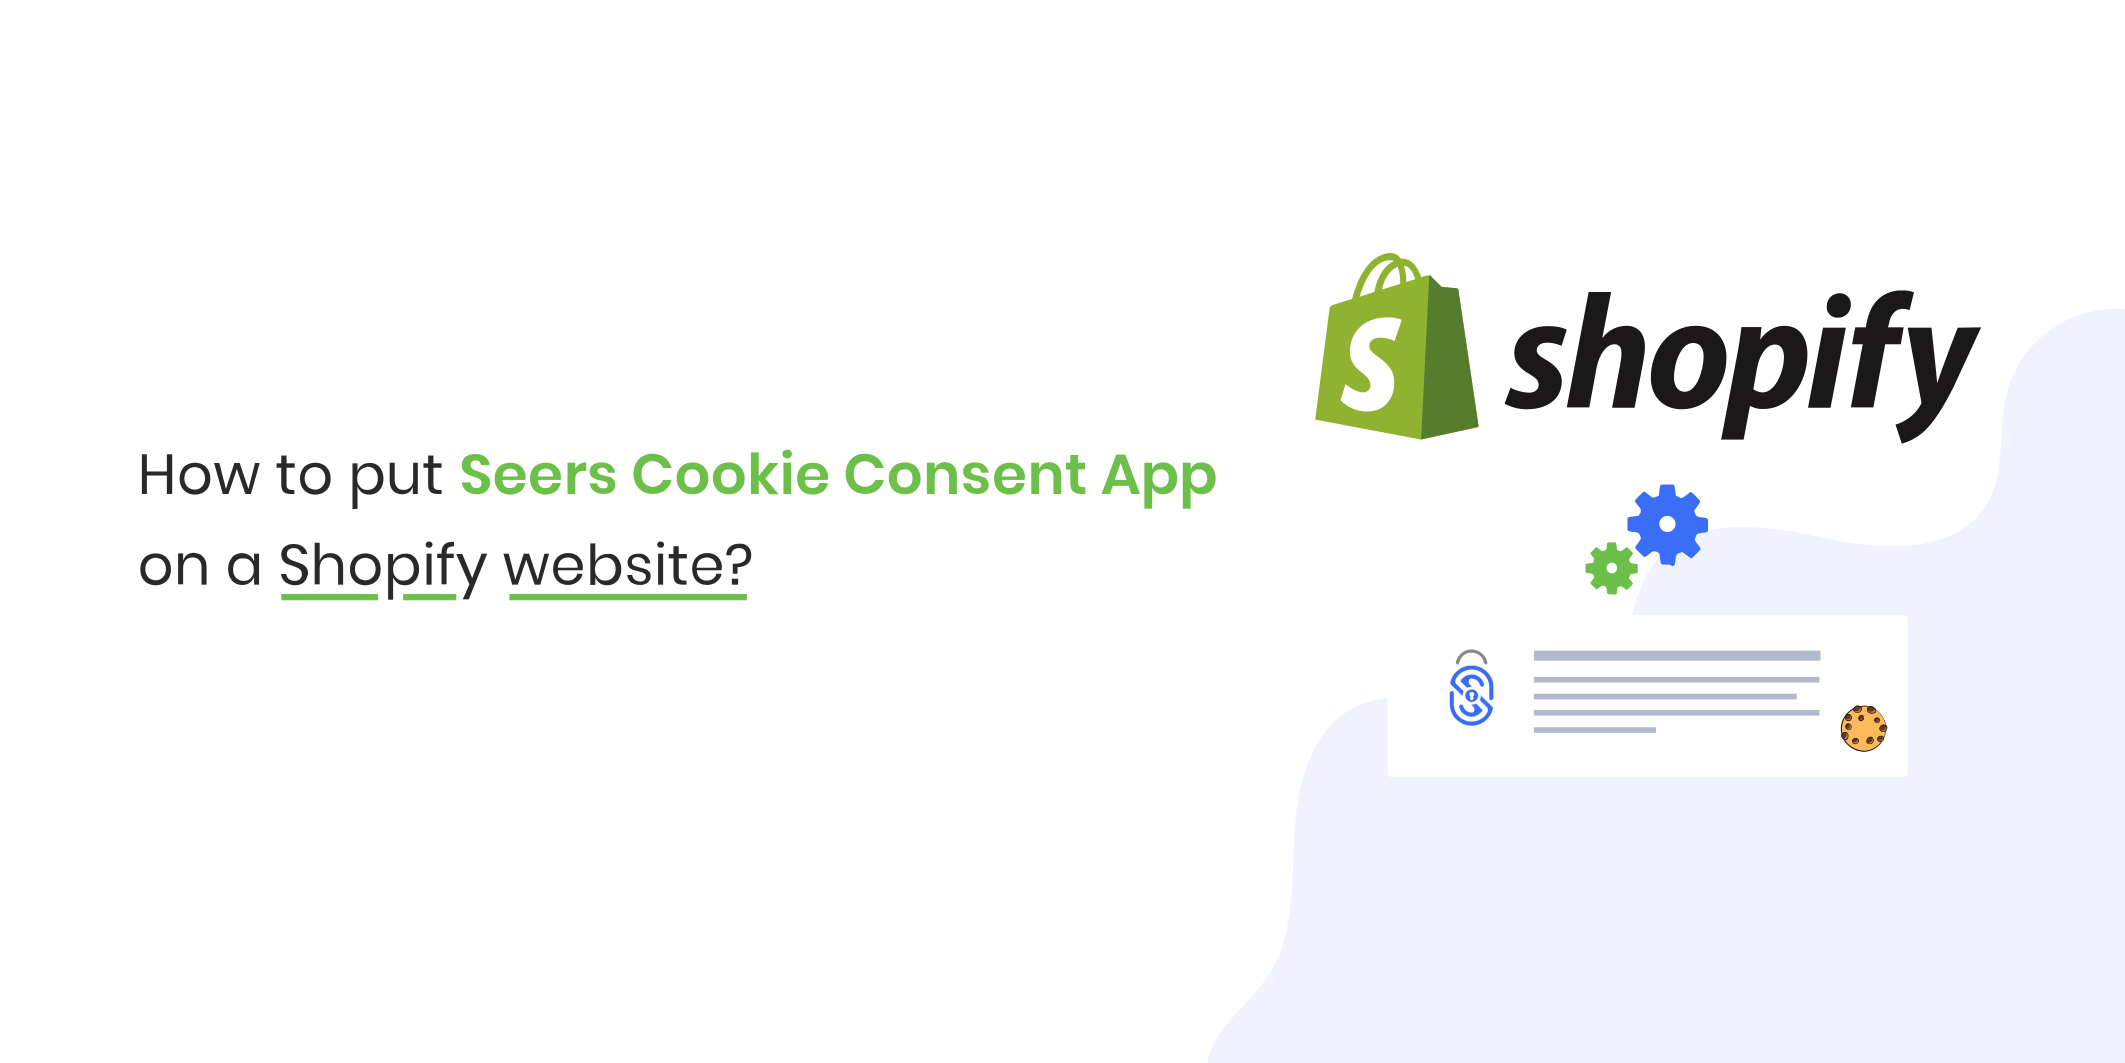 Seers Cookie Consent App On Shopify Website